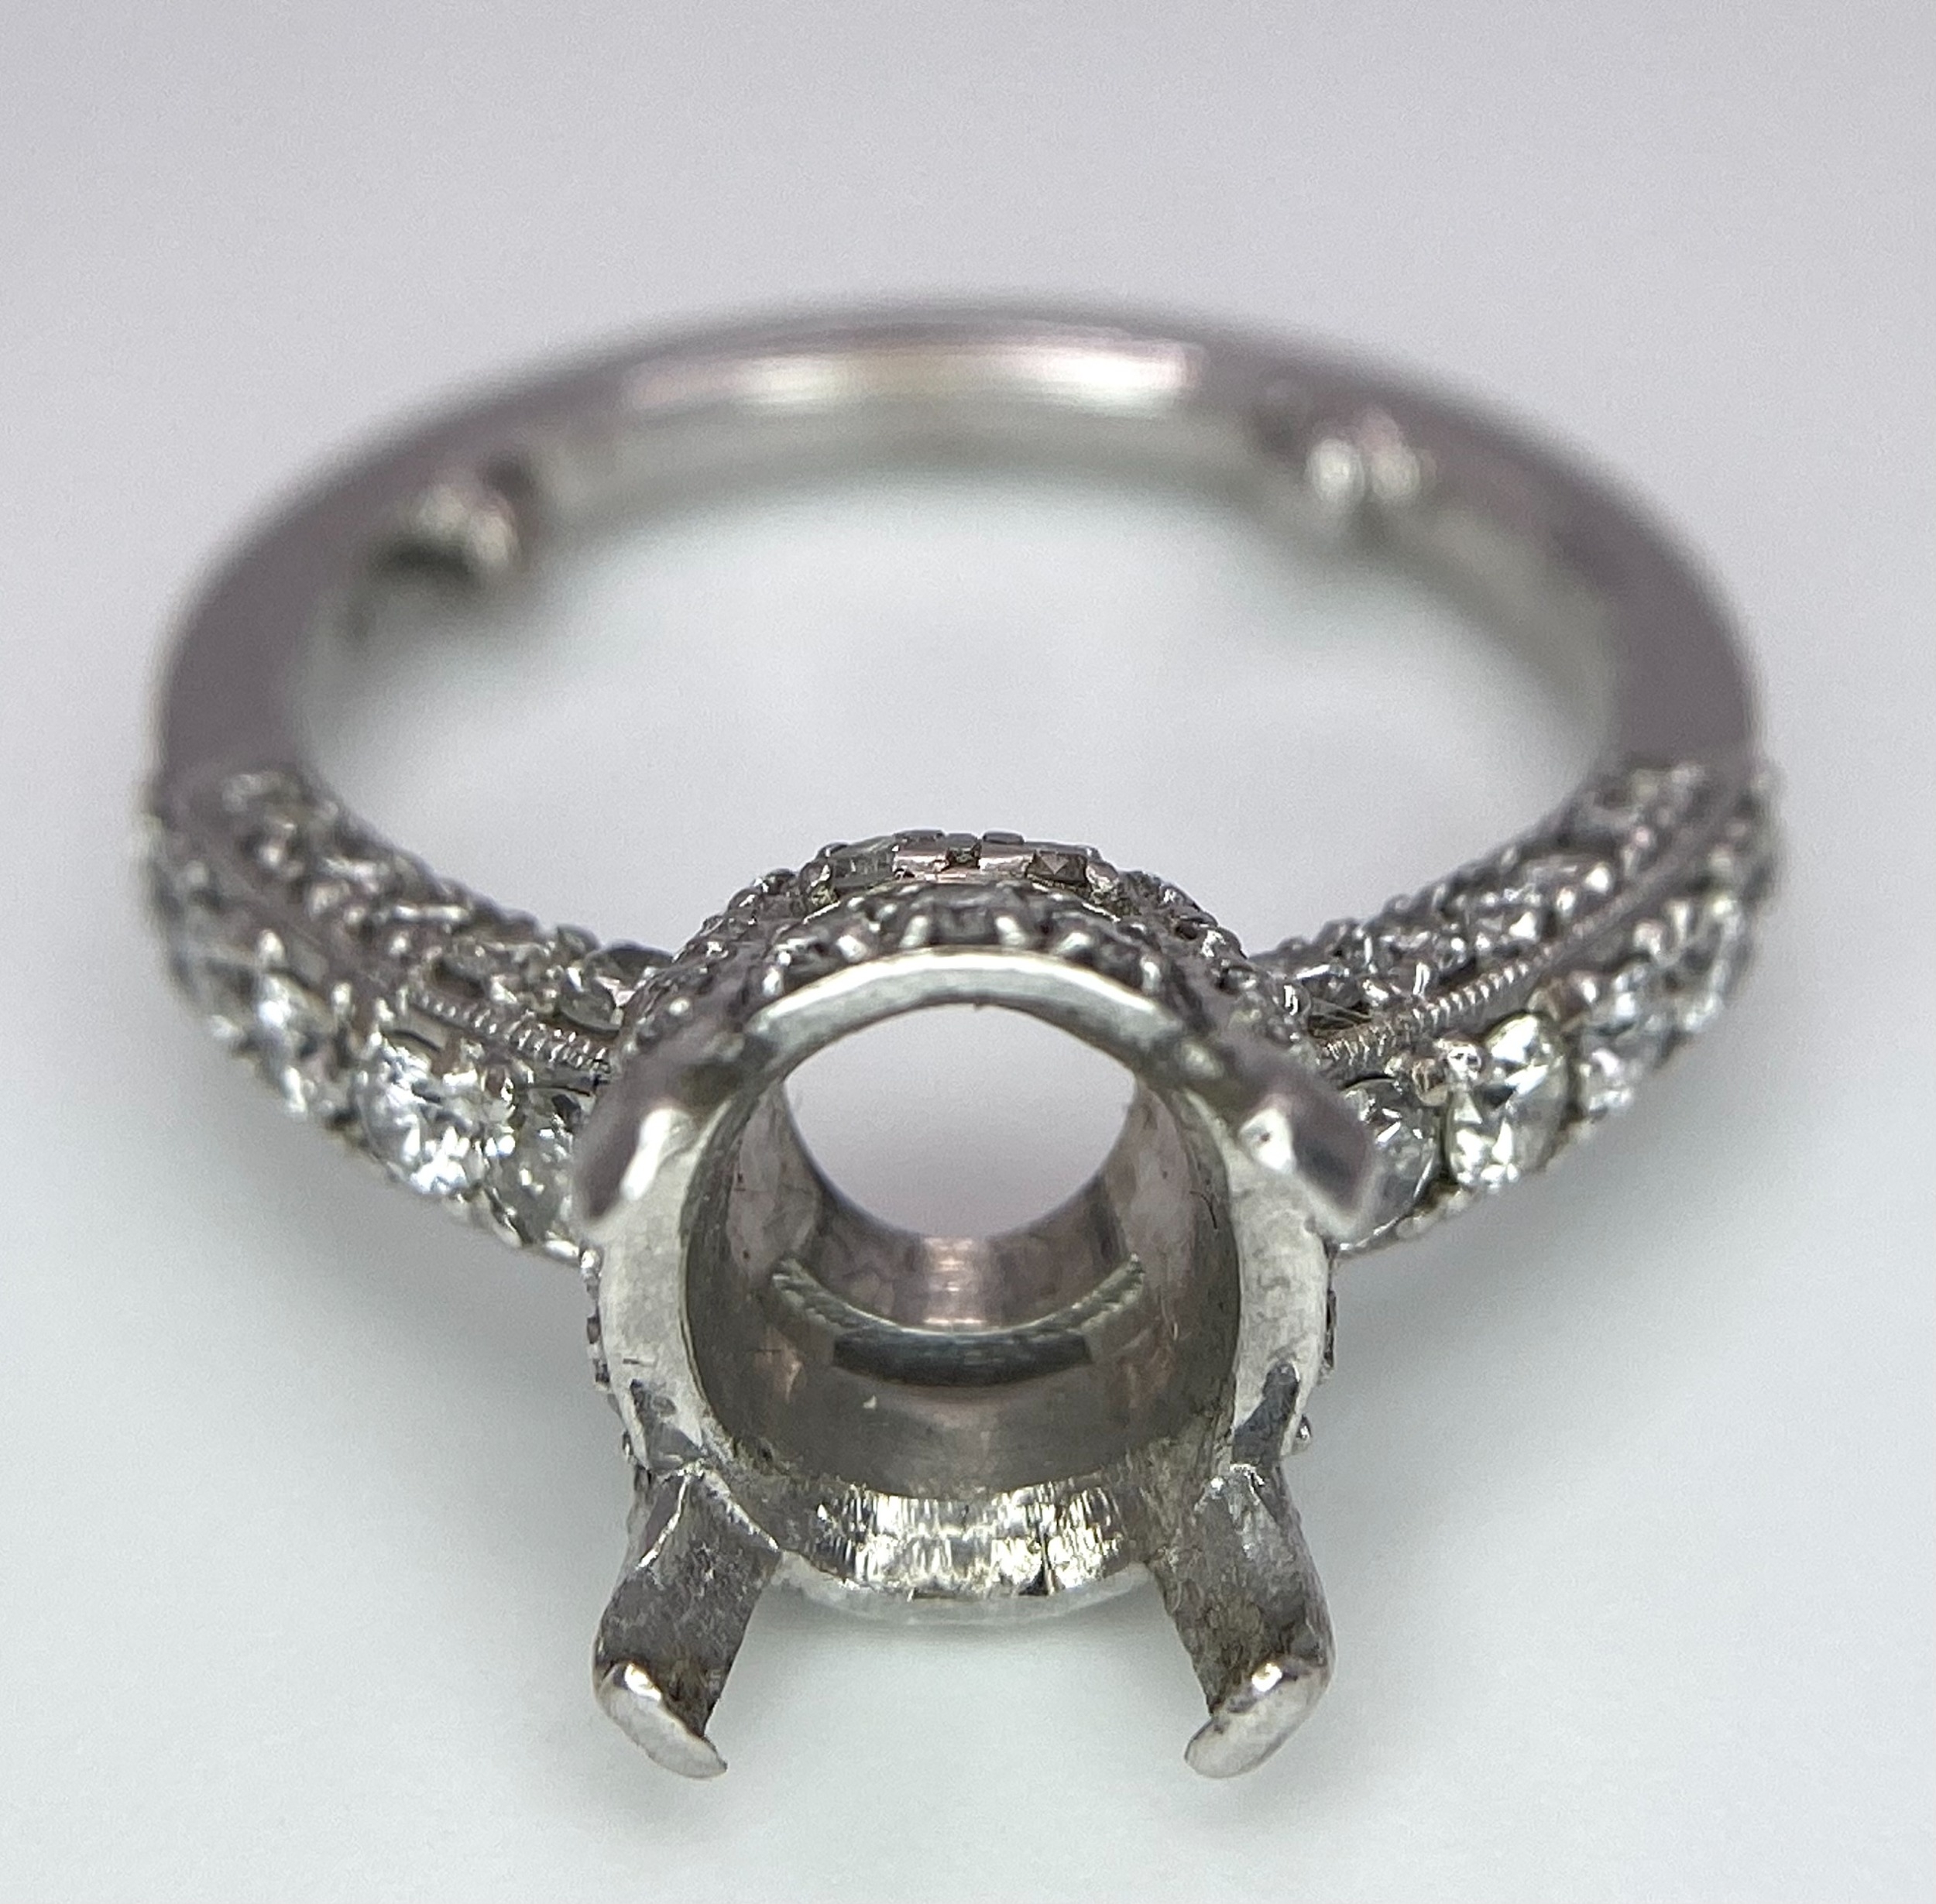 AN 18K WHITE GOLD 4 CLAW SINGLE STONE RING WITH DIAMOND SET BEZEL, SHOULDERS AND SIDES - Ready to - Image 4 of 6